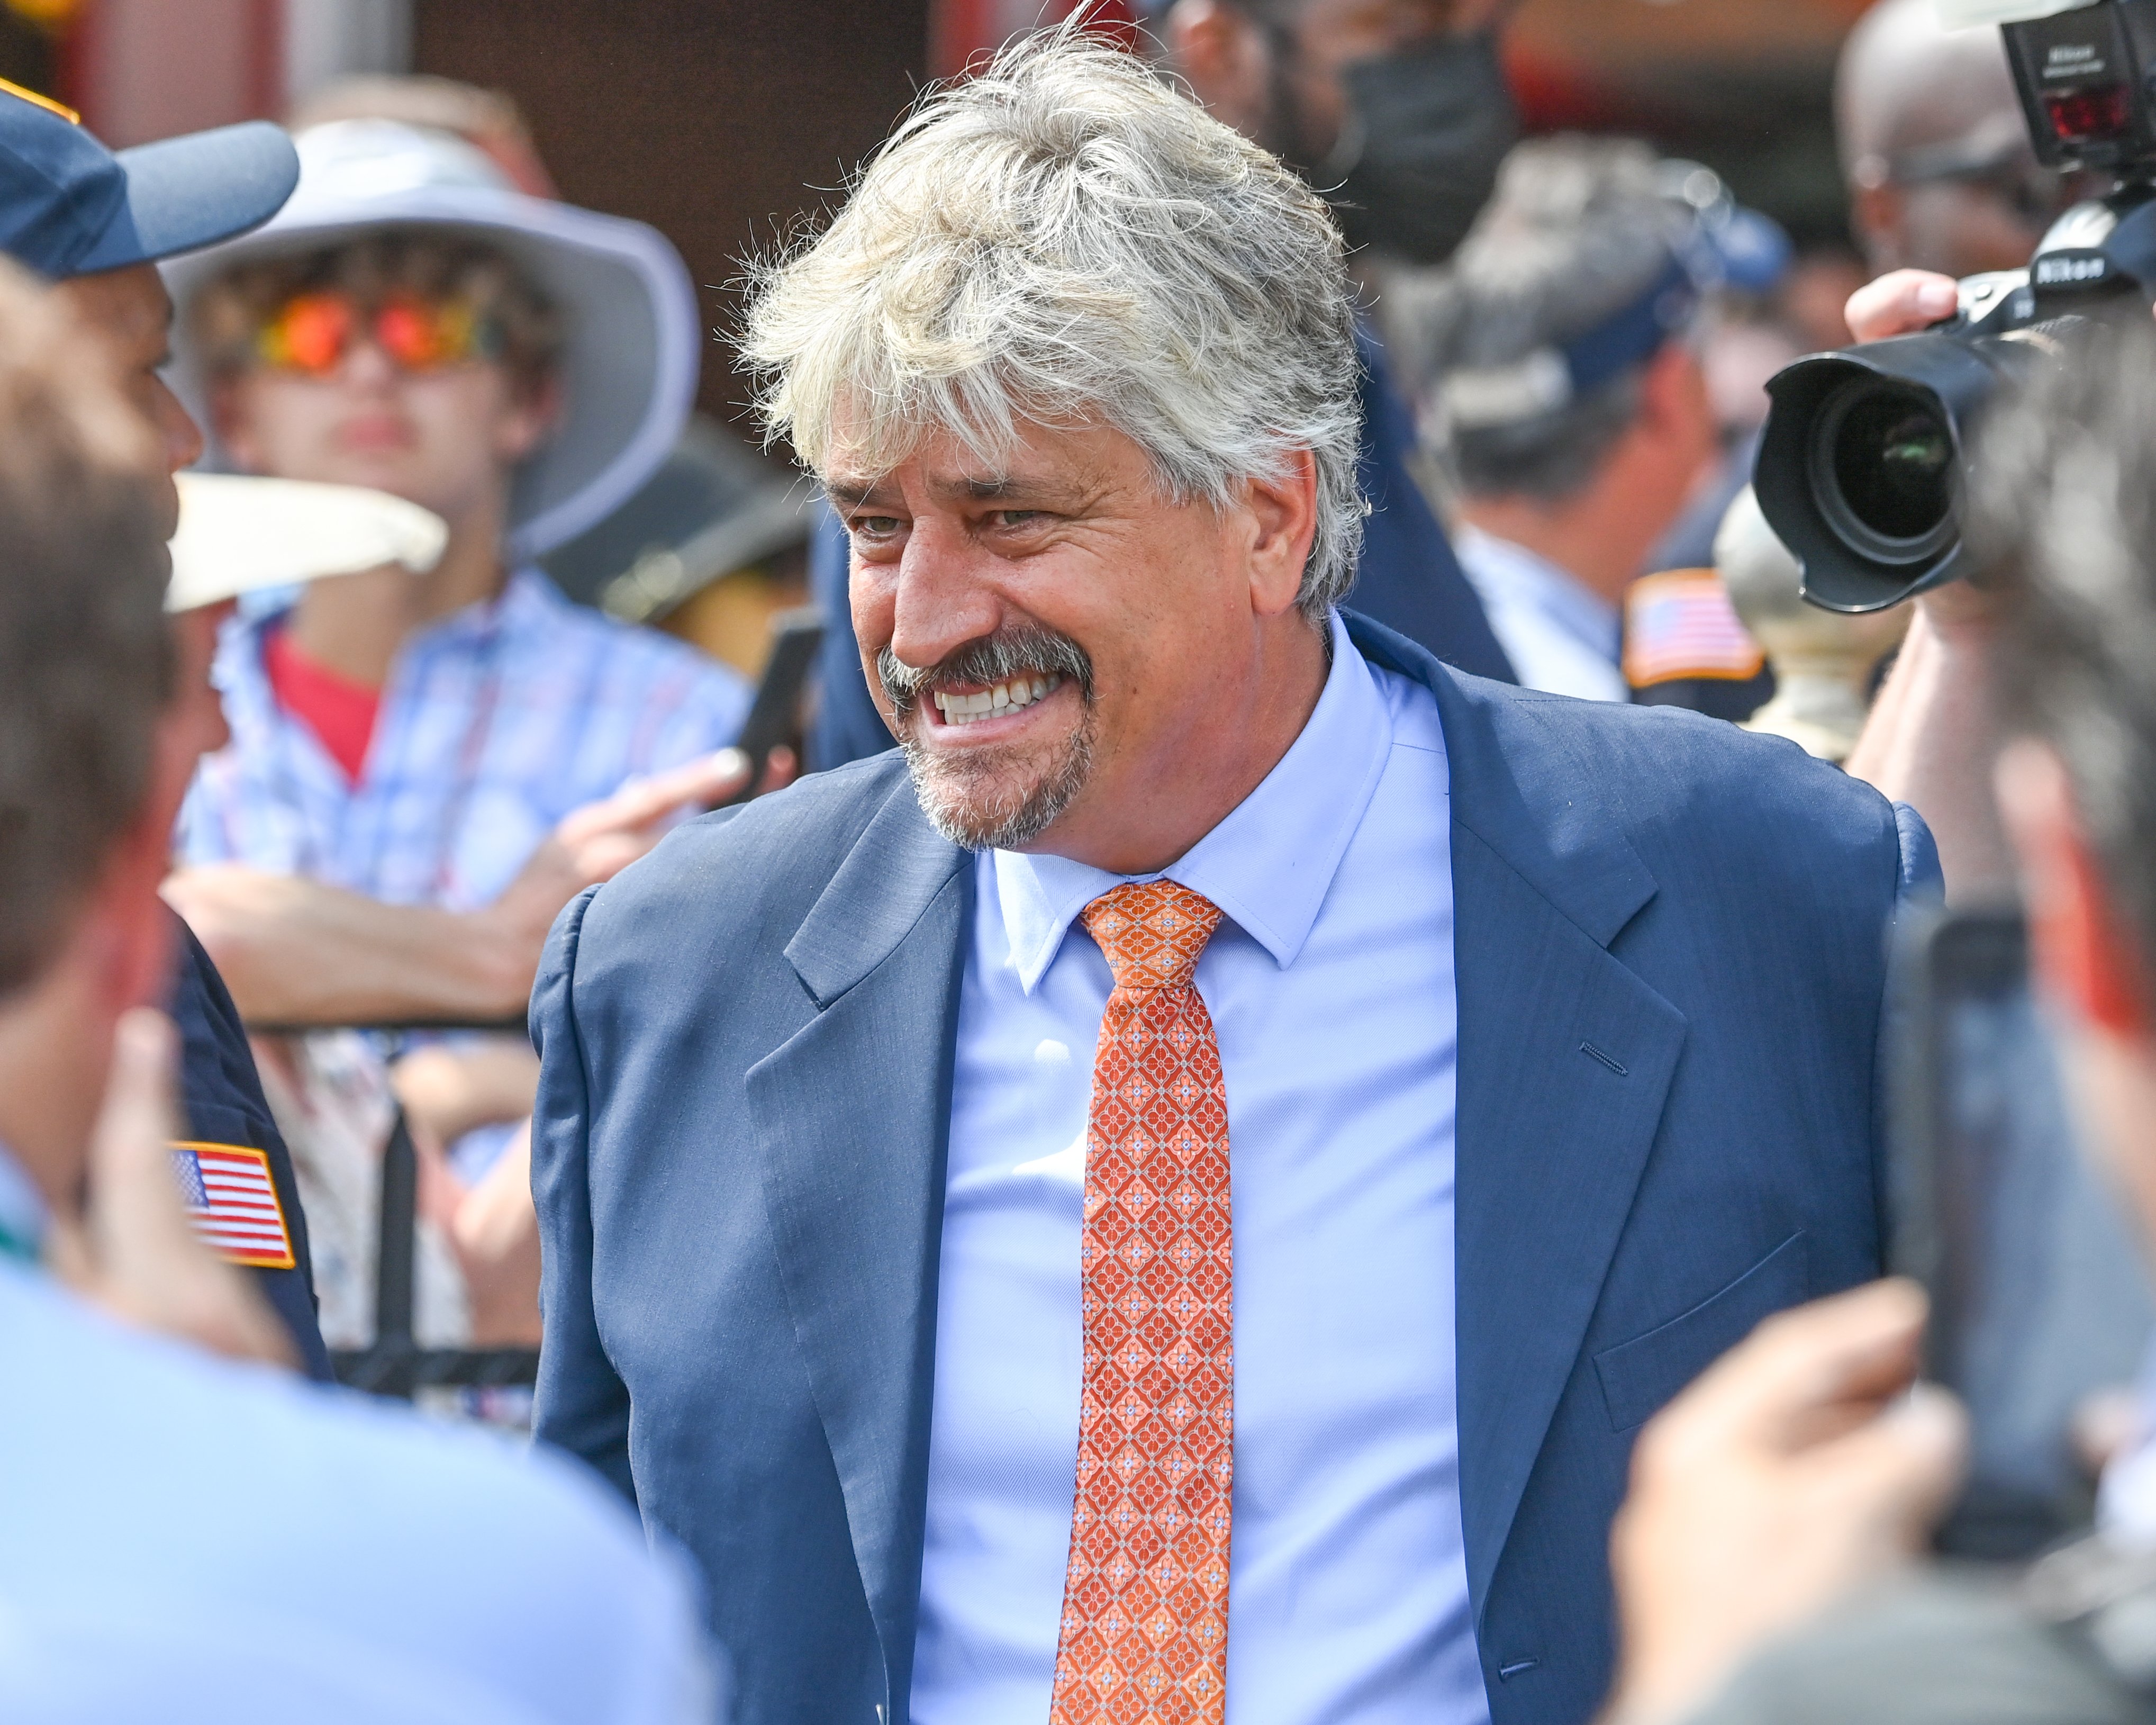 Steve Asmussen celebrates career win 9,446, setting a new North American record, at Saratoga Race Course, Aug. 7, 2021 (Bob Mayberger/Museum Collection)